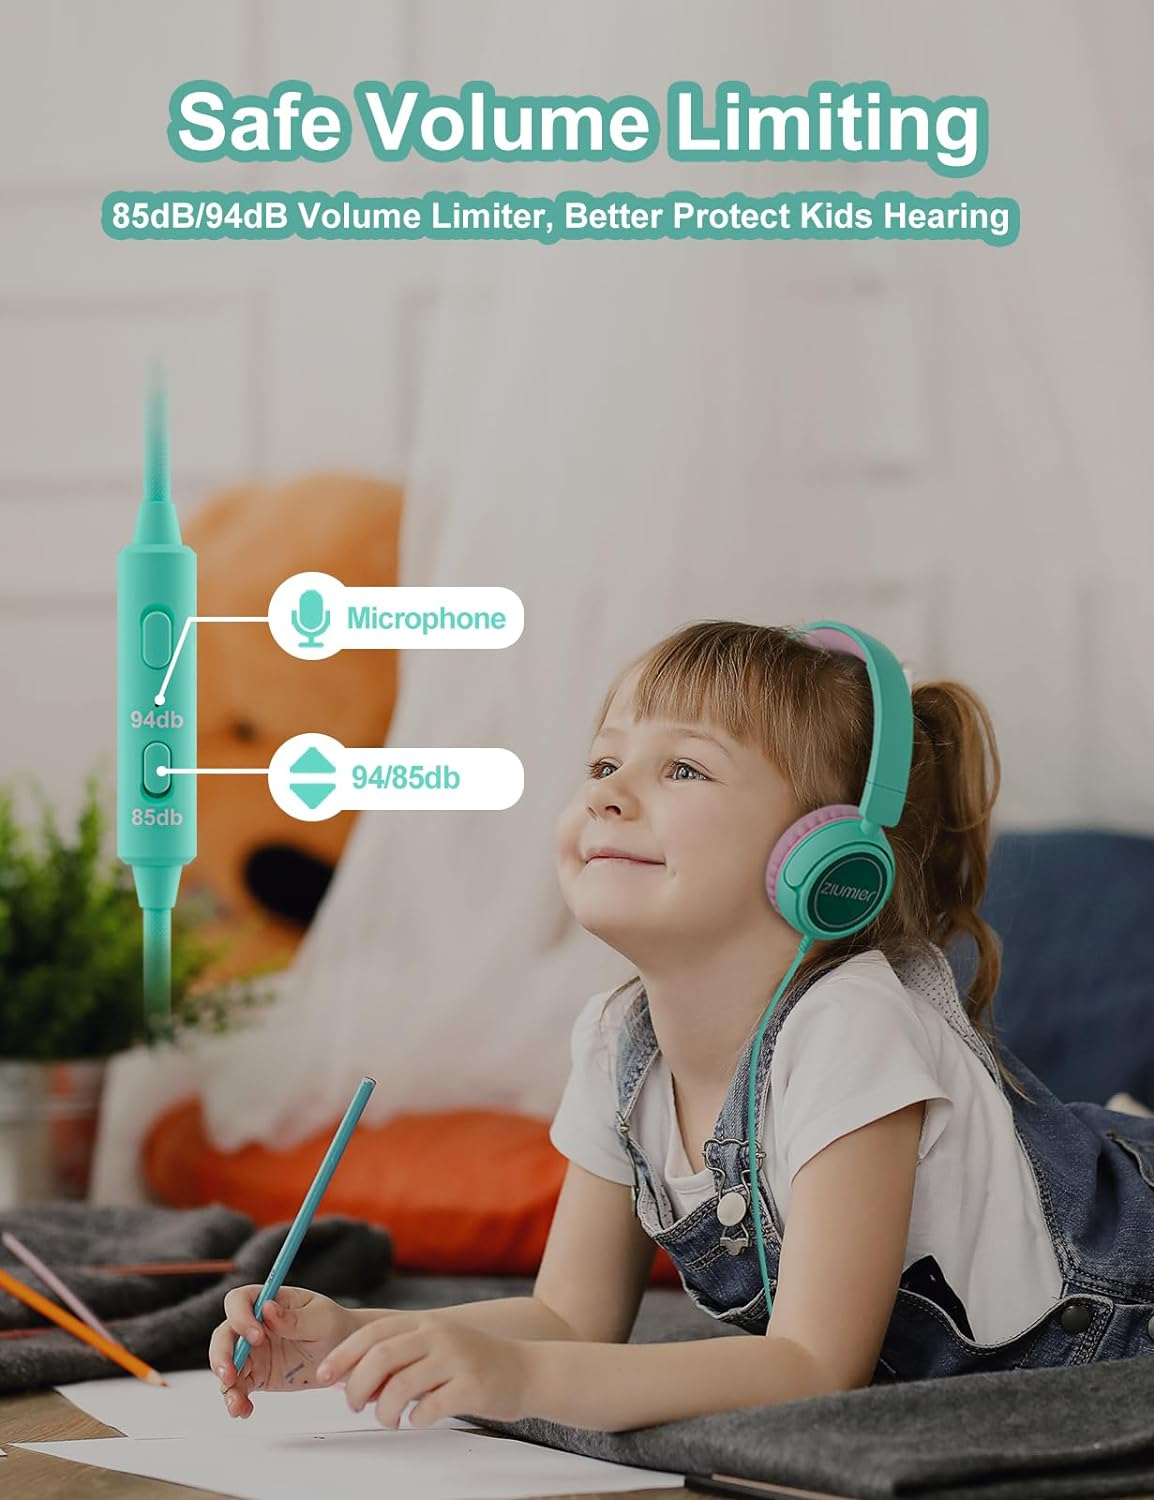 ZIUMIER Kids Headphones Wired, Headphones for Kids with Microphone for Boys Girls, 85dB/ 94dB Volume Limited, Foldable Toddler Headphones for School Airplane Travel,iPad, Fire Tablet, Kindle